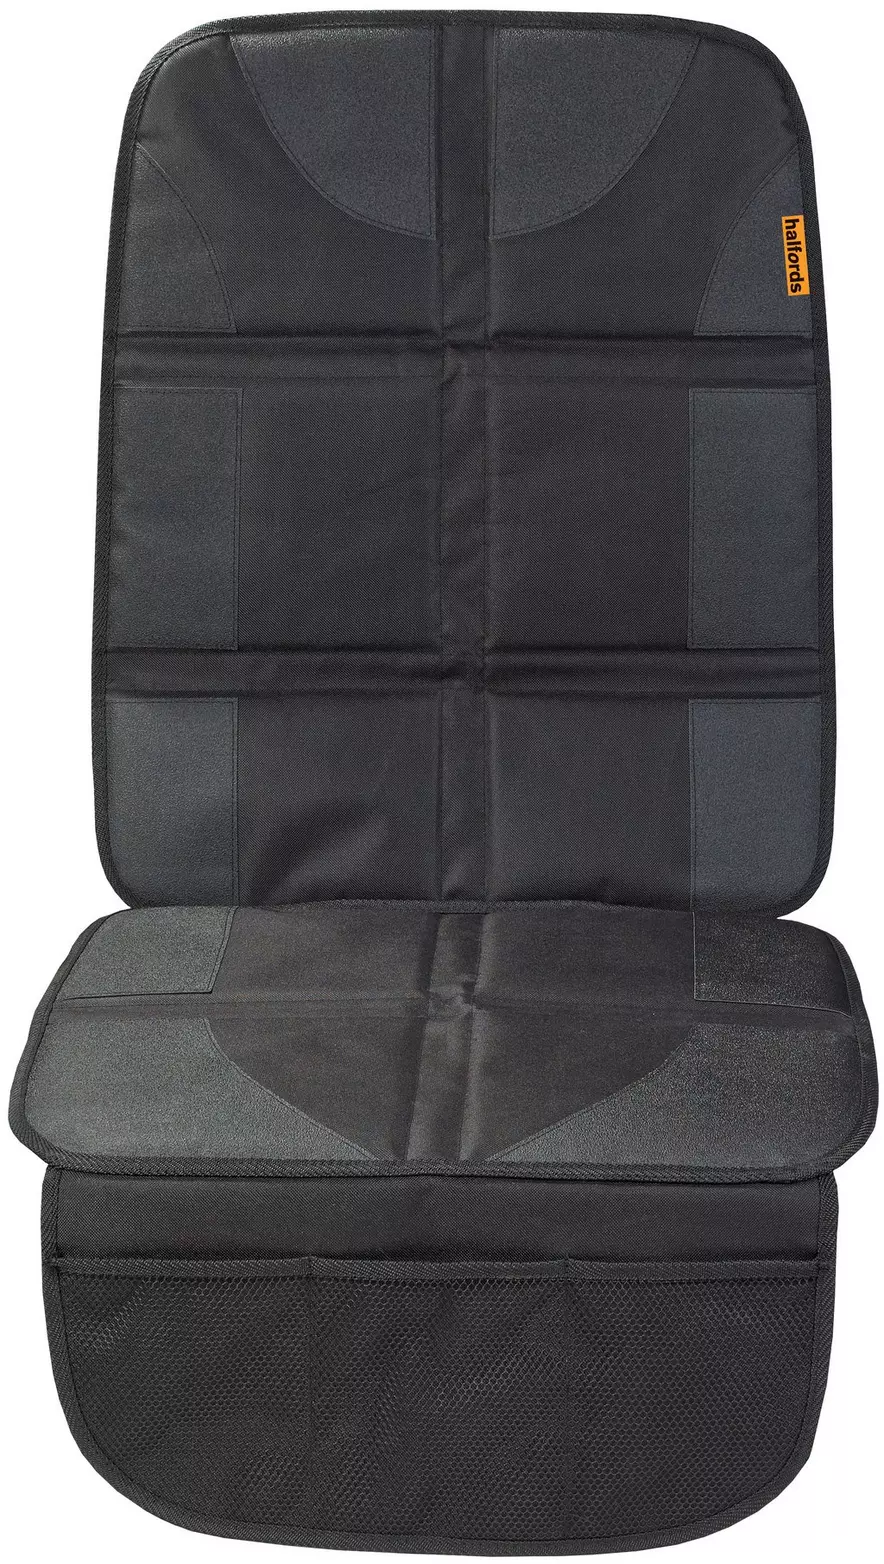 https://cdn.media.halfords.com/i/washford/237831/Halfords-Seat-Protector-with-Storage.webp?$sfcc_tile_featured$&w=884